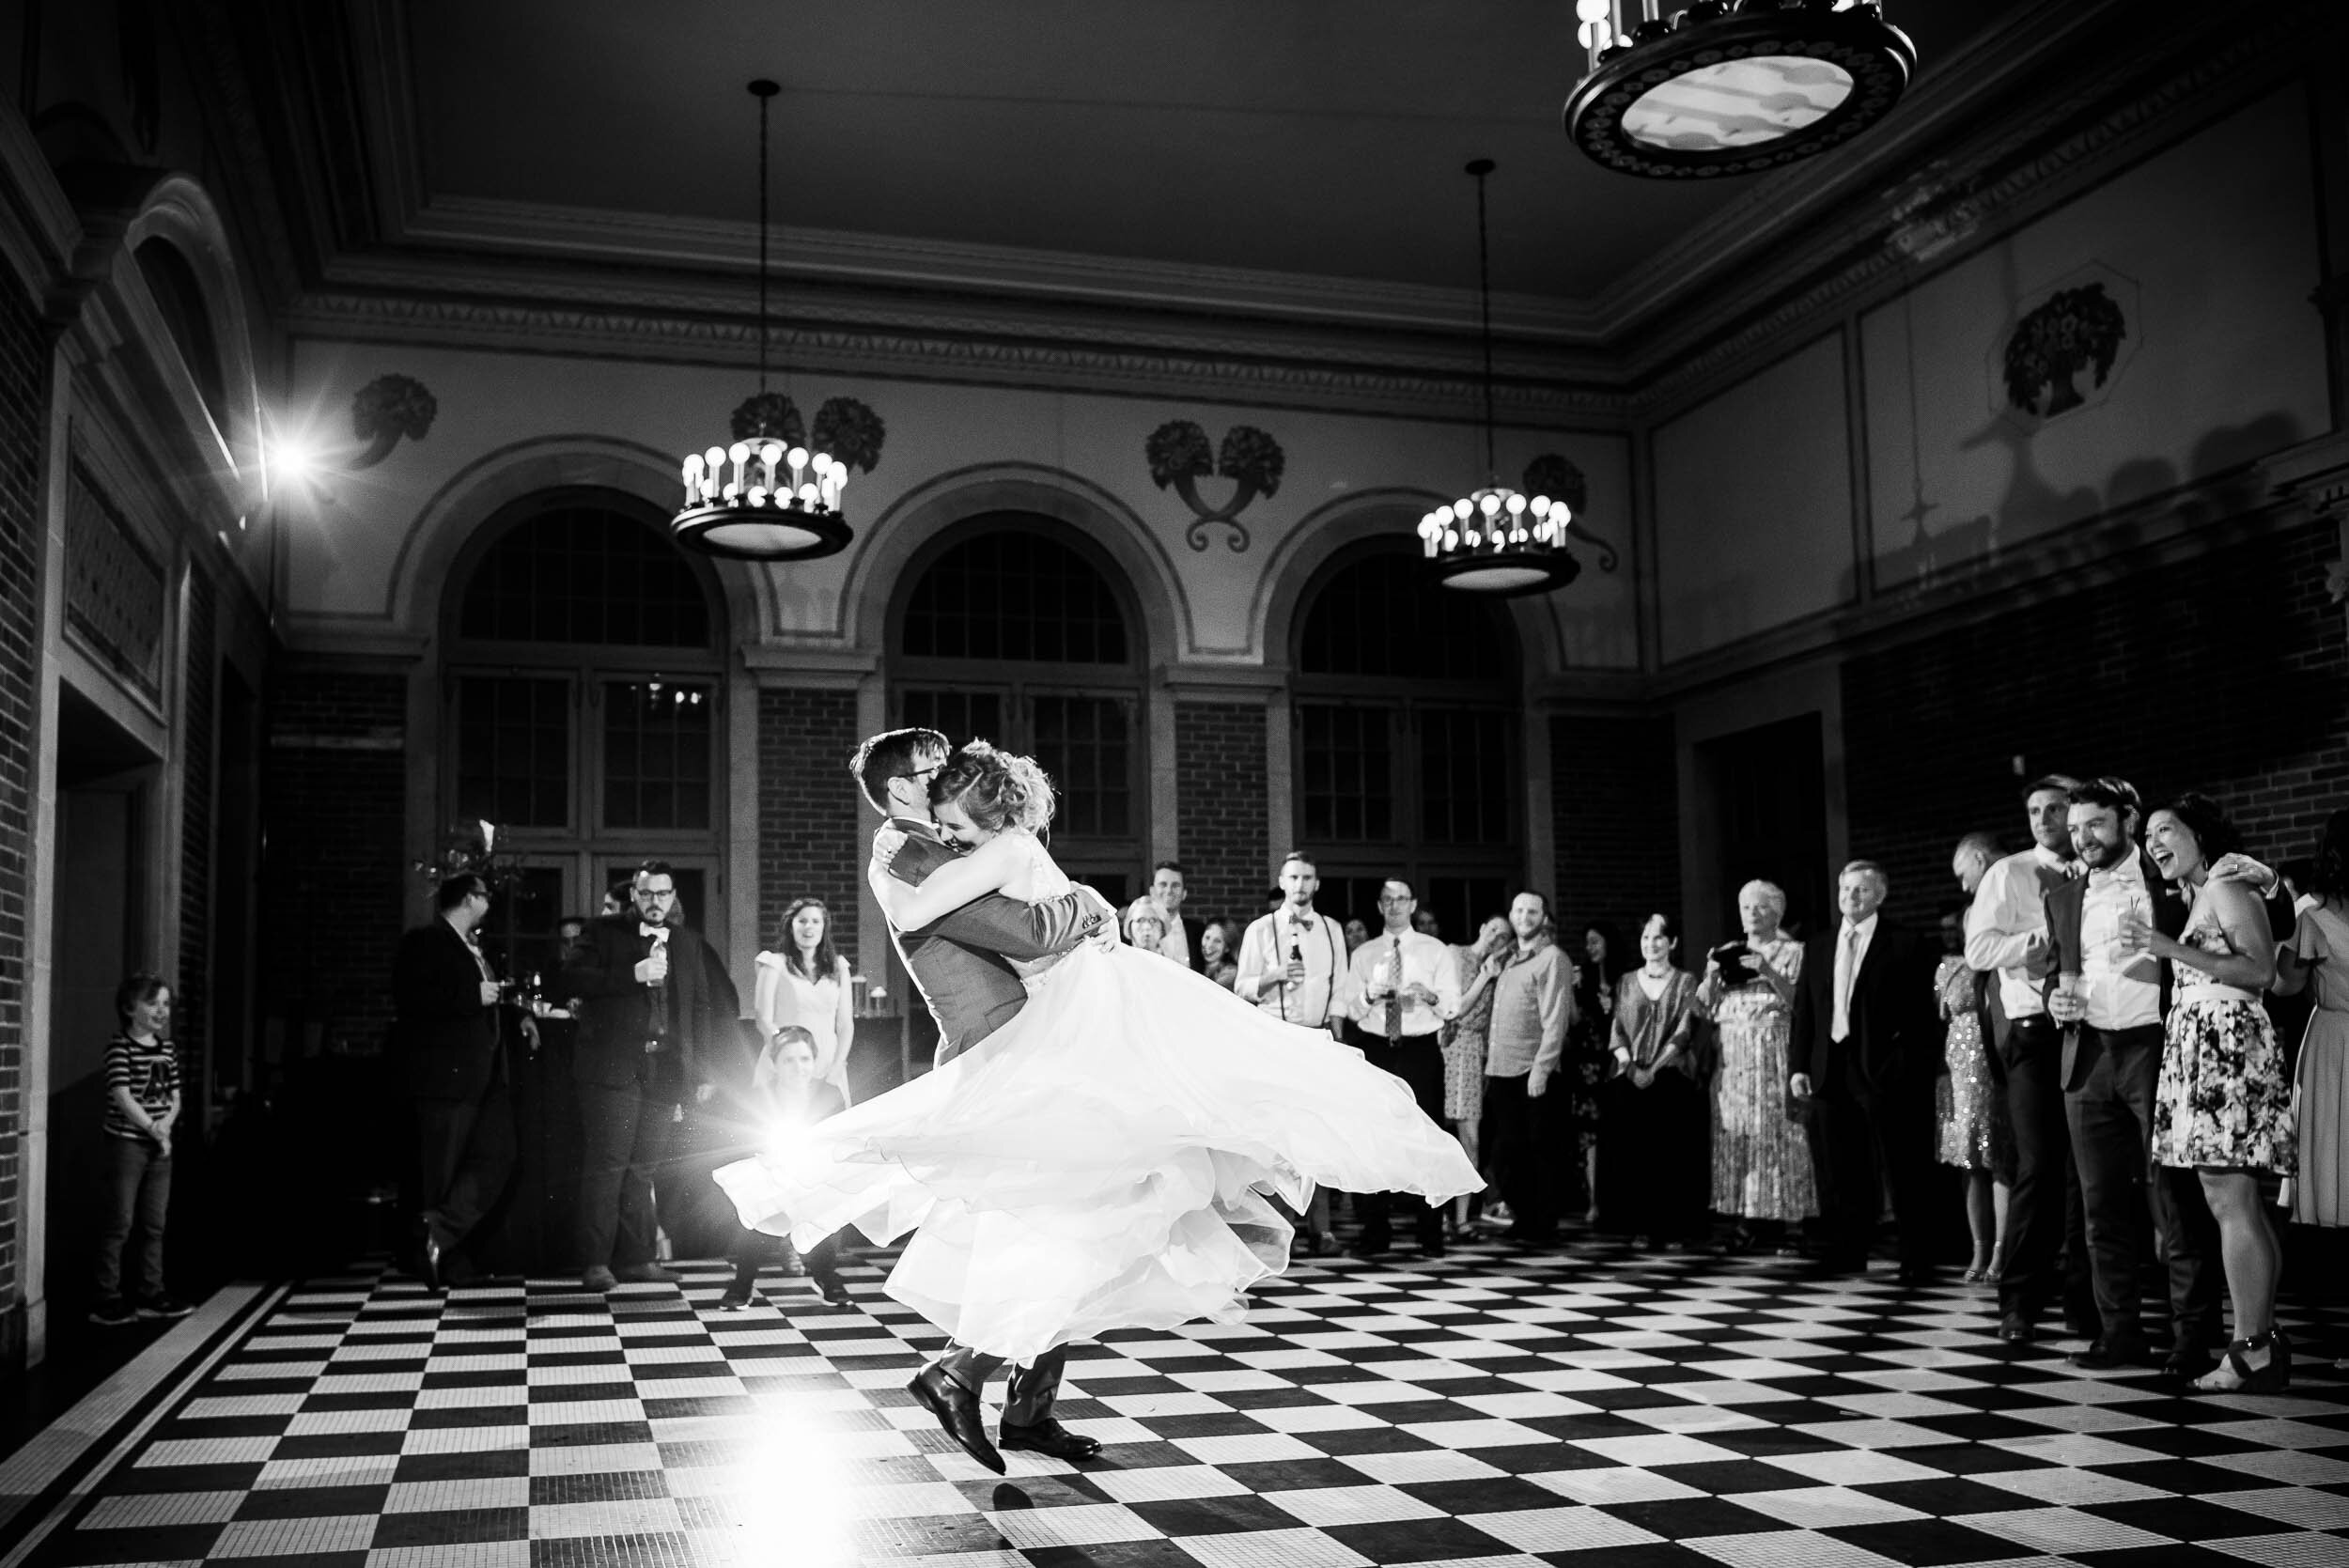 Groom spins the bride during their first dance: Columbus Park Refectory Chicago wedding captured by J. Brown Photography.